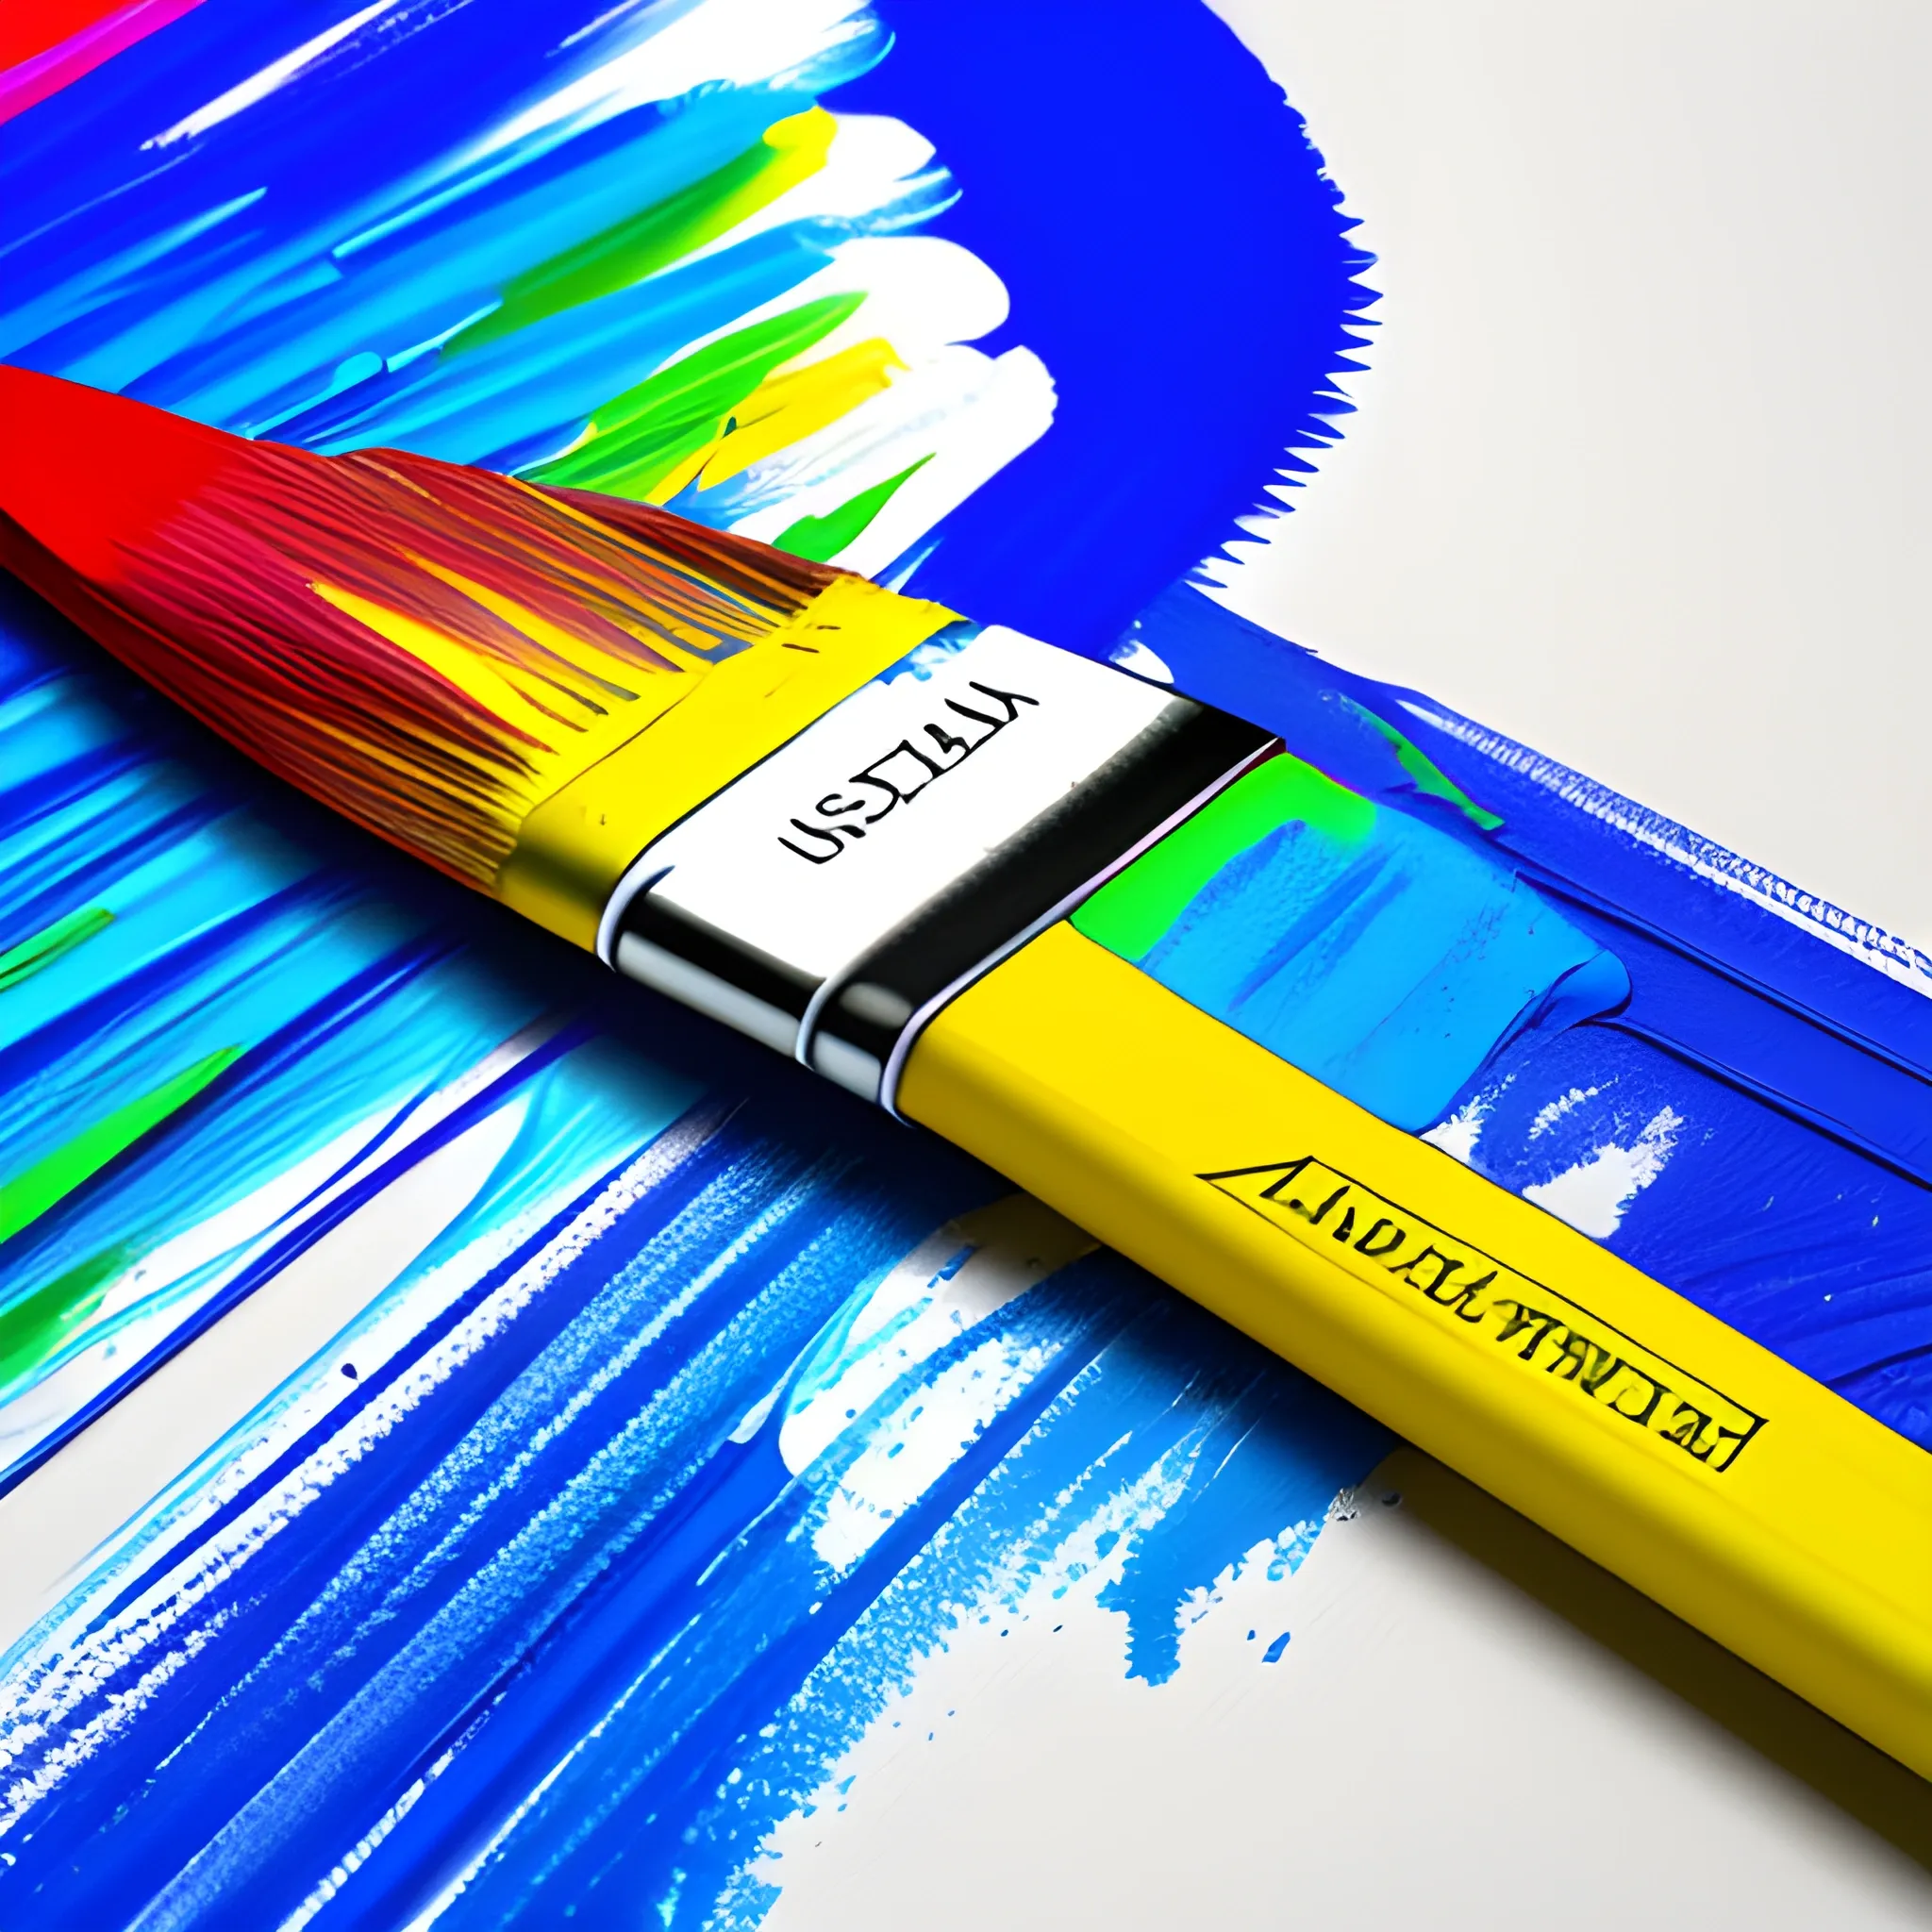 A paintbrush dipped in vibrant colors, painting a website layout on a canvas., 3D